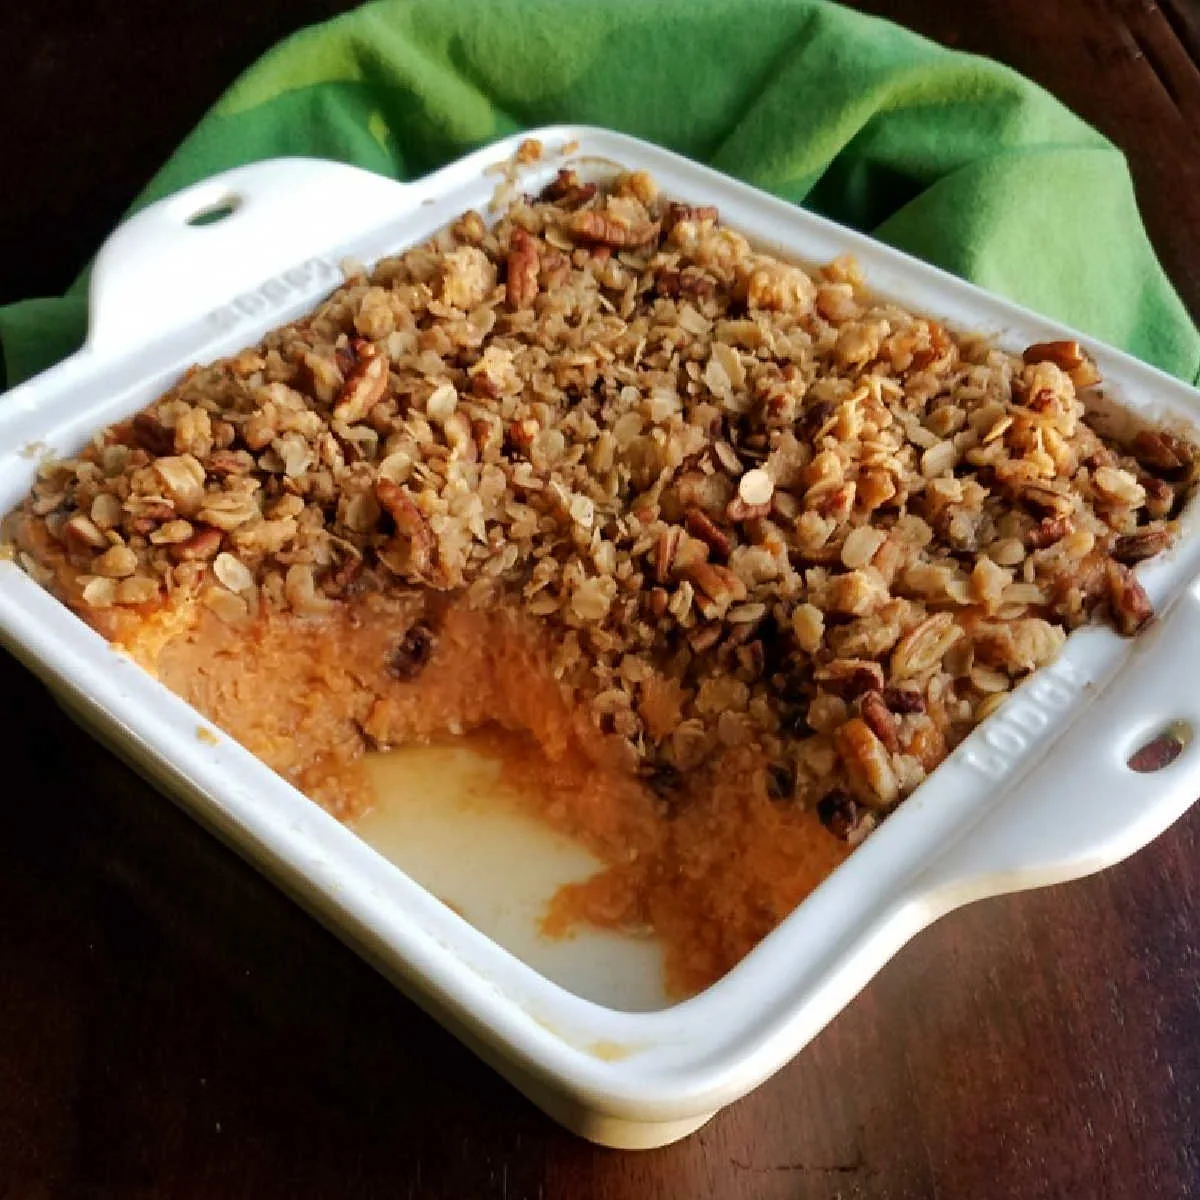 Square baking dish filled with oat and pecan topped casserole with some missing showing smooth sweet potato layer underneath.